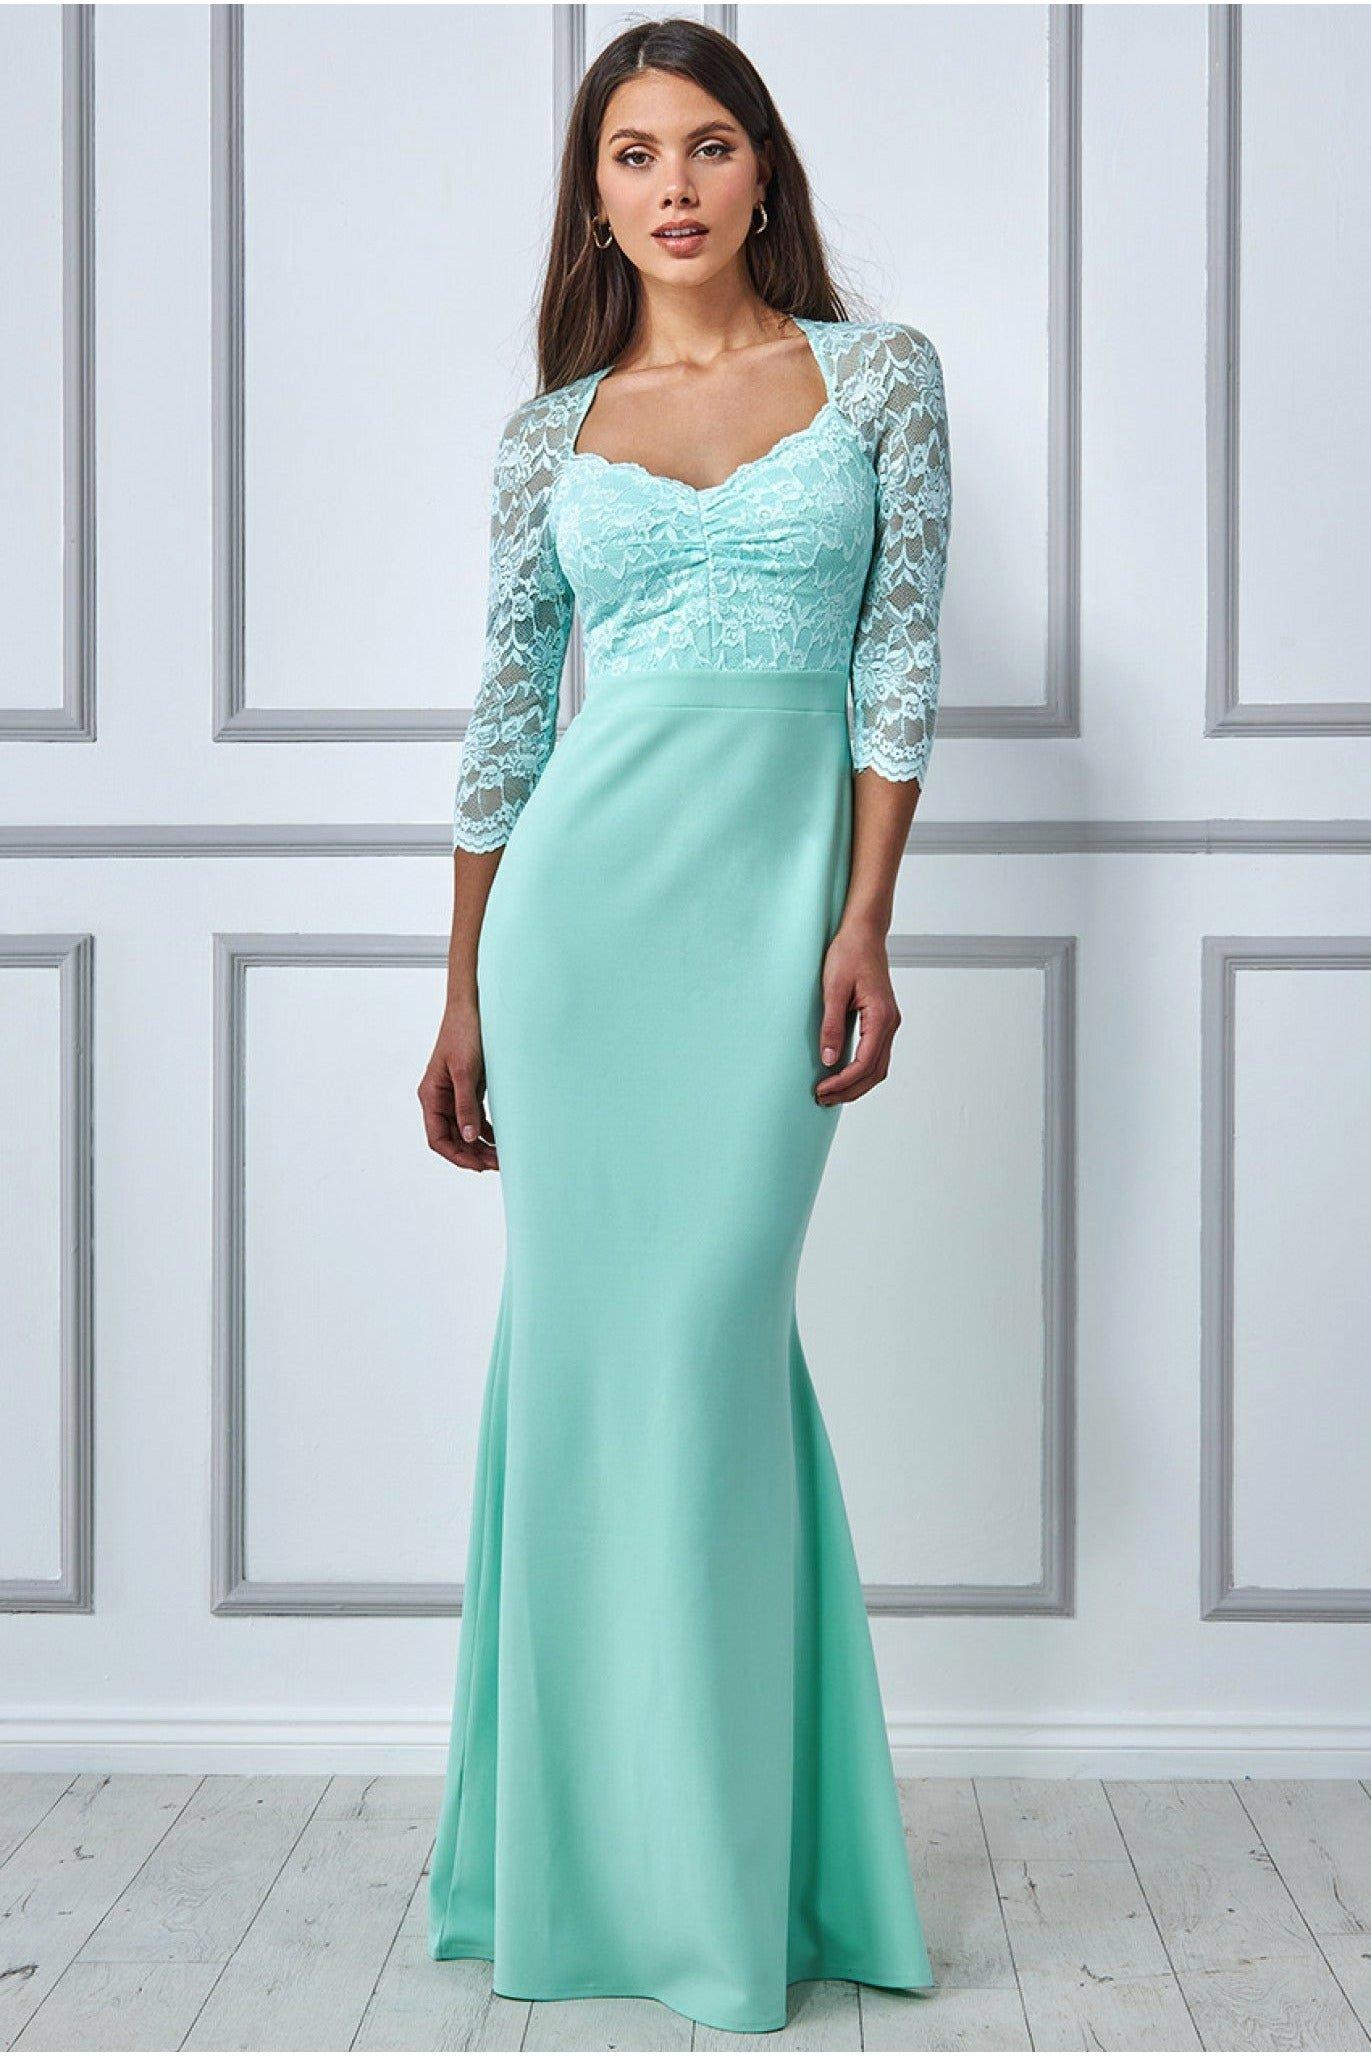 Lace Bodice Maxi Dress With Sleeves